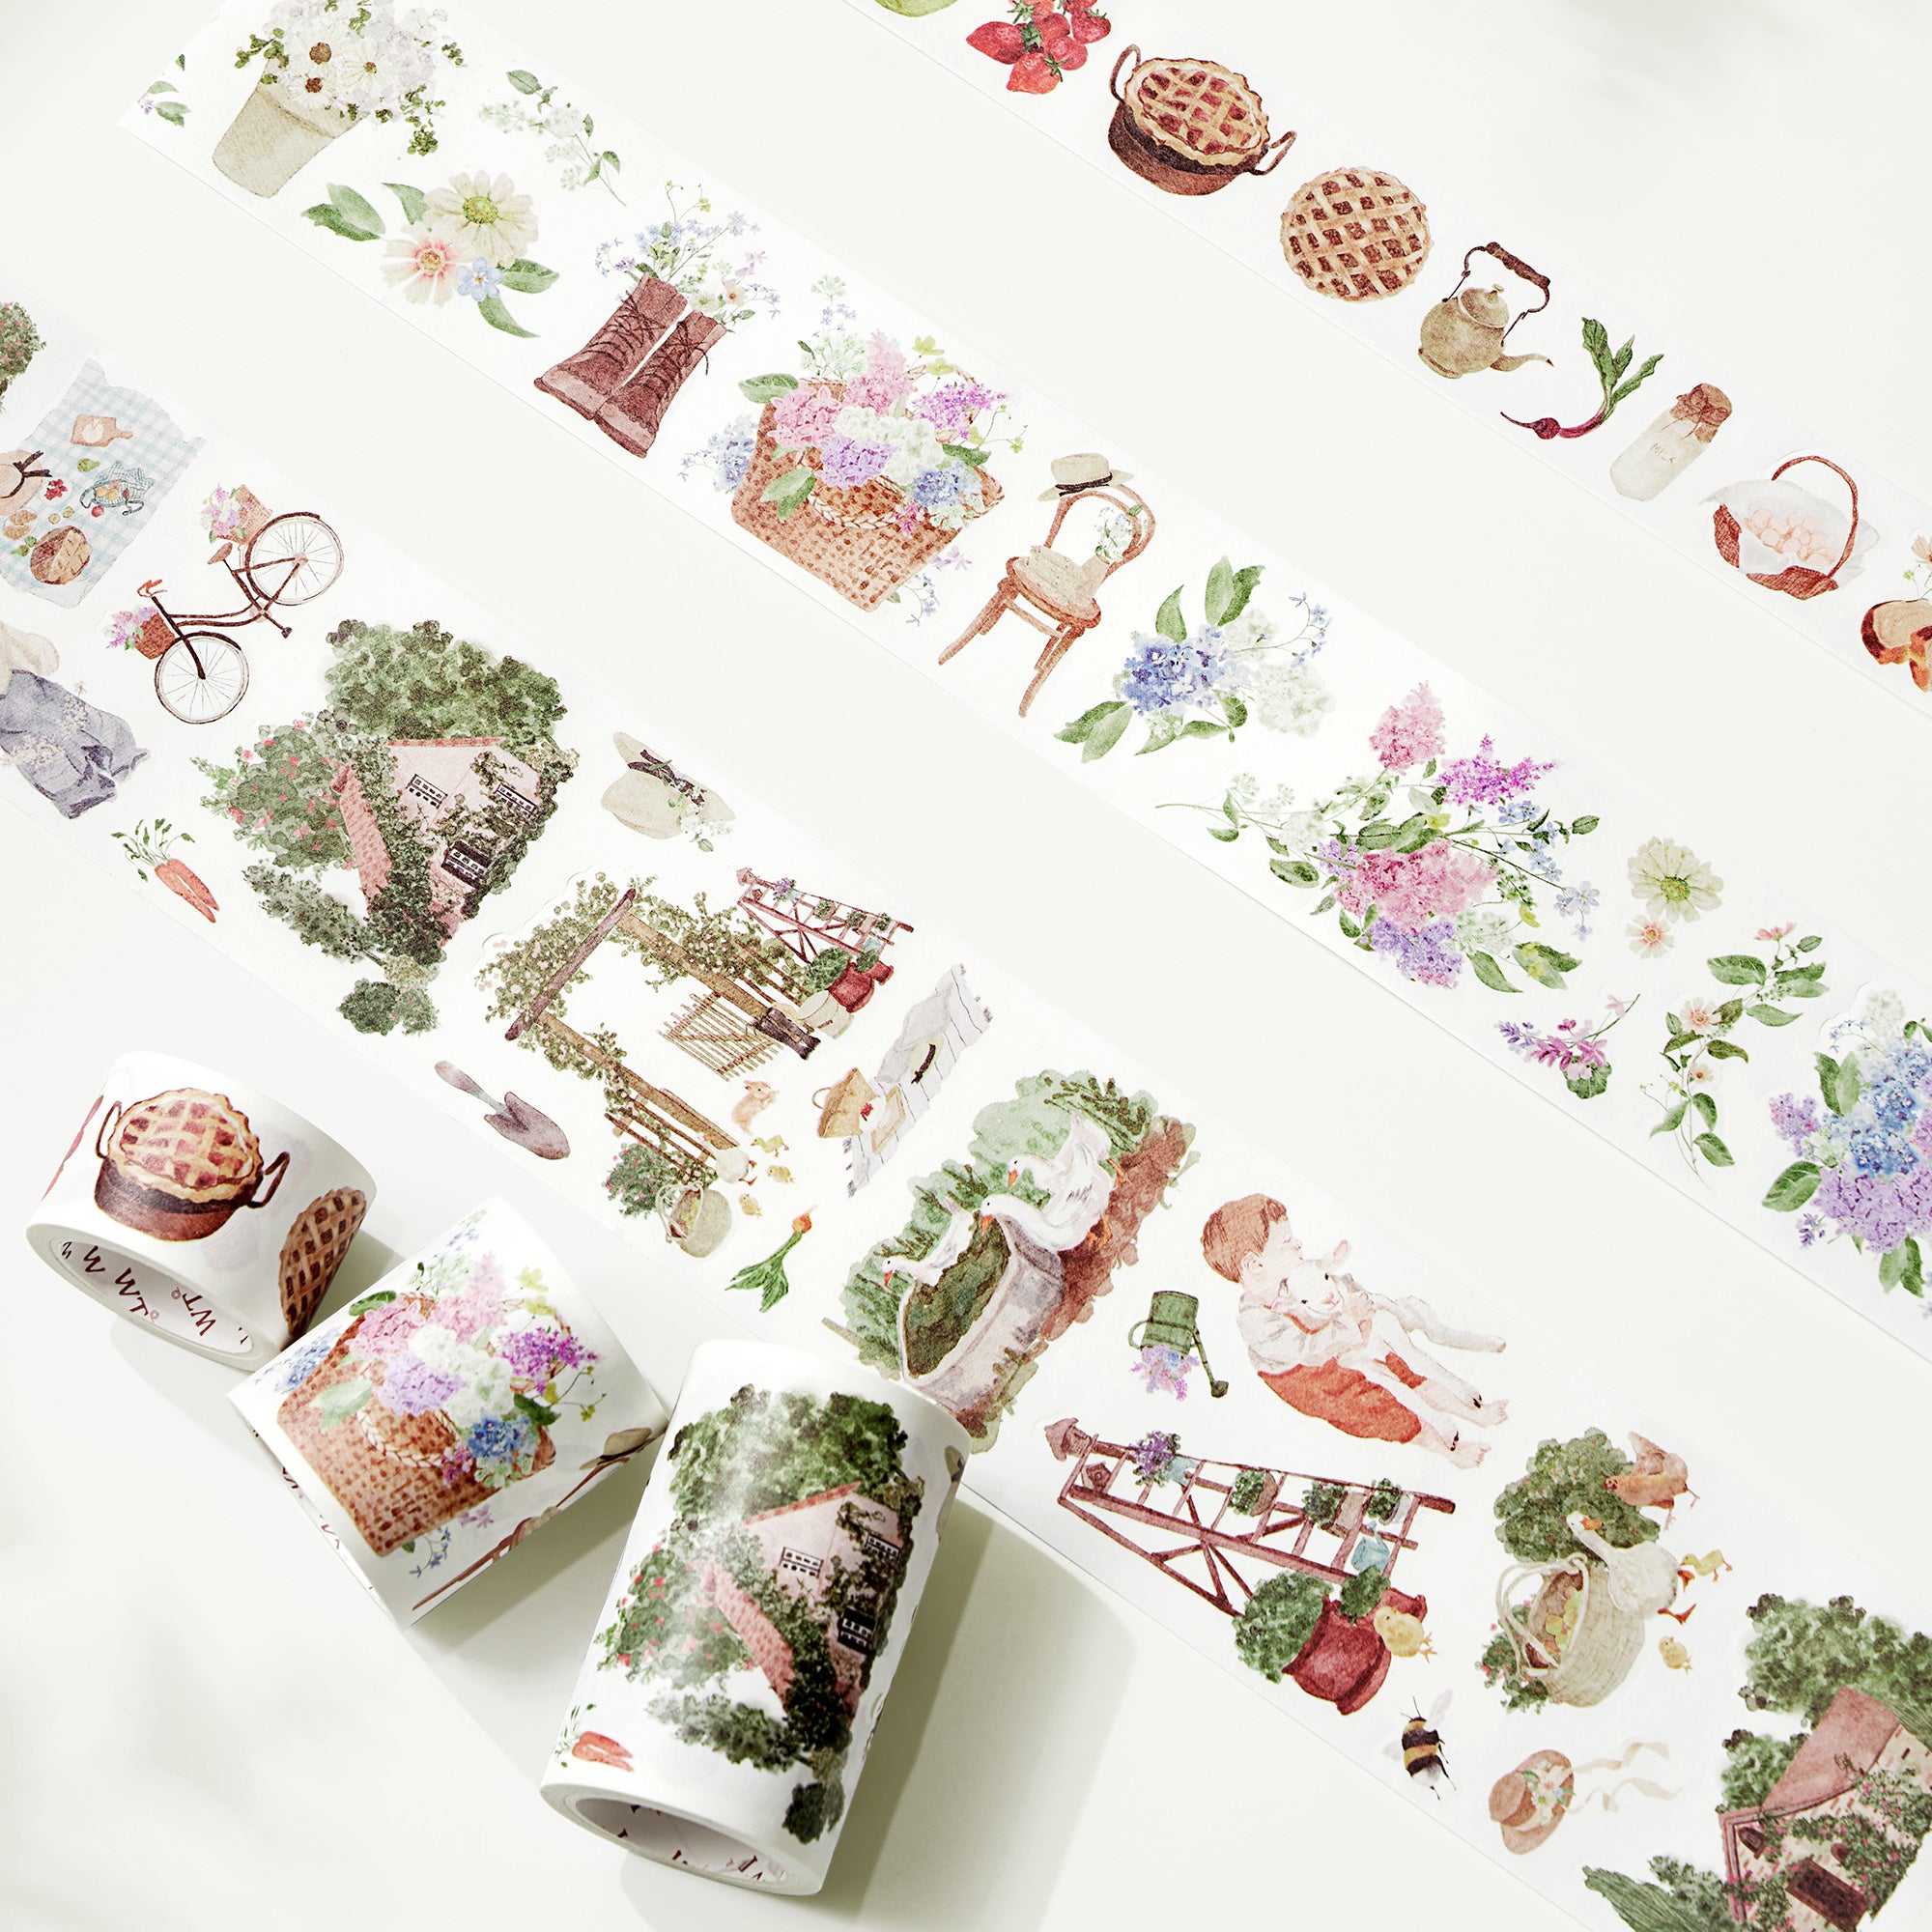 Cottage Charm Washi Tape Sticker Set | The Washi Tape Shop. Beautiful Washi and Decorative Tape For Bullet Journals, Gift Wrapping, Planner Decoration and DIY Projects